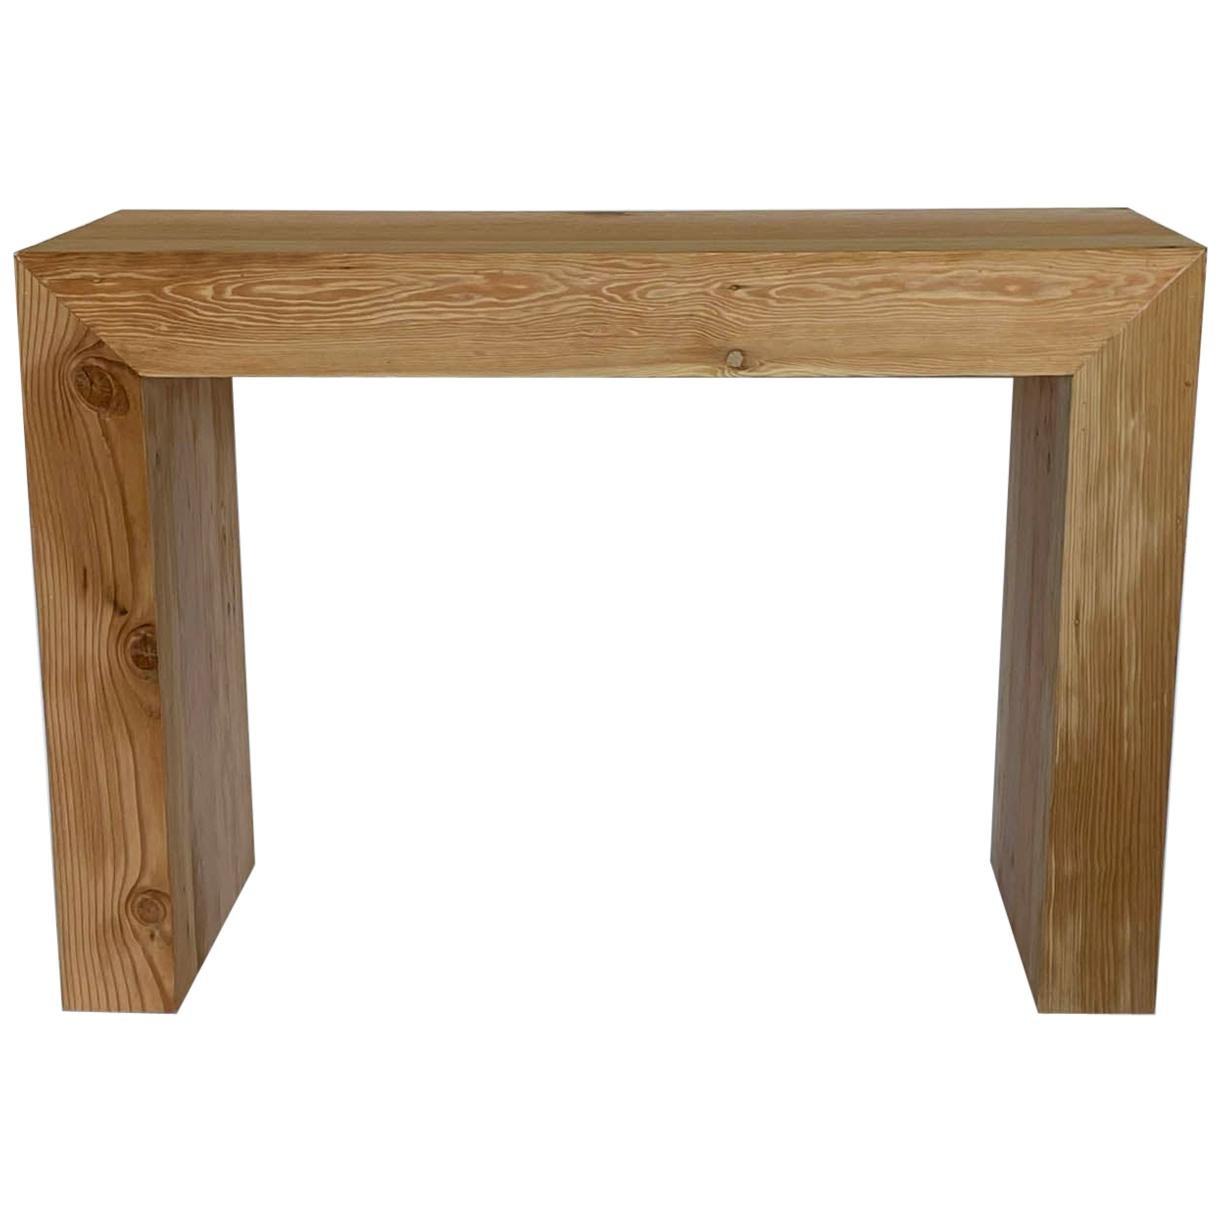 Custom Parsons Console Table in Douglas Fir by Dos Gallos